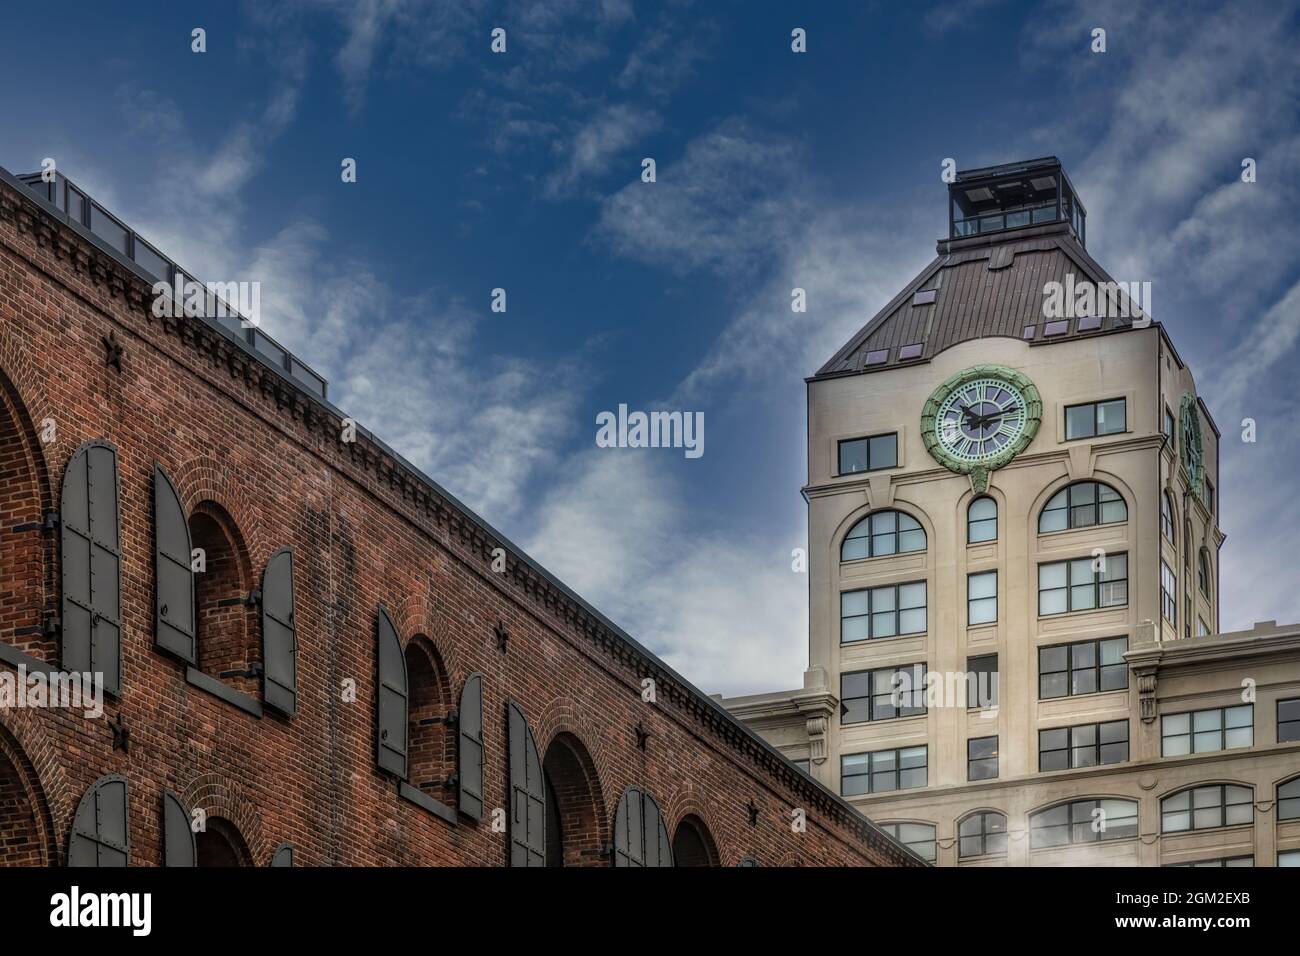 Dumbo's Clock Tower - View leading from St. Ann’s Warehouse Theatre to the Old Tower Clock building in the prominent neighborhood of DUMBO (Down Under Stock Photo